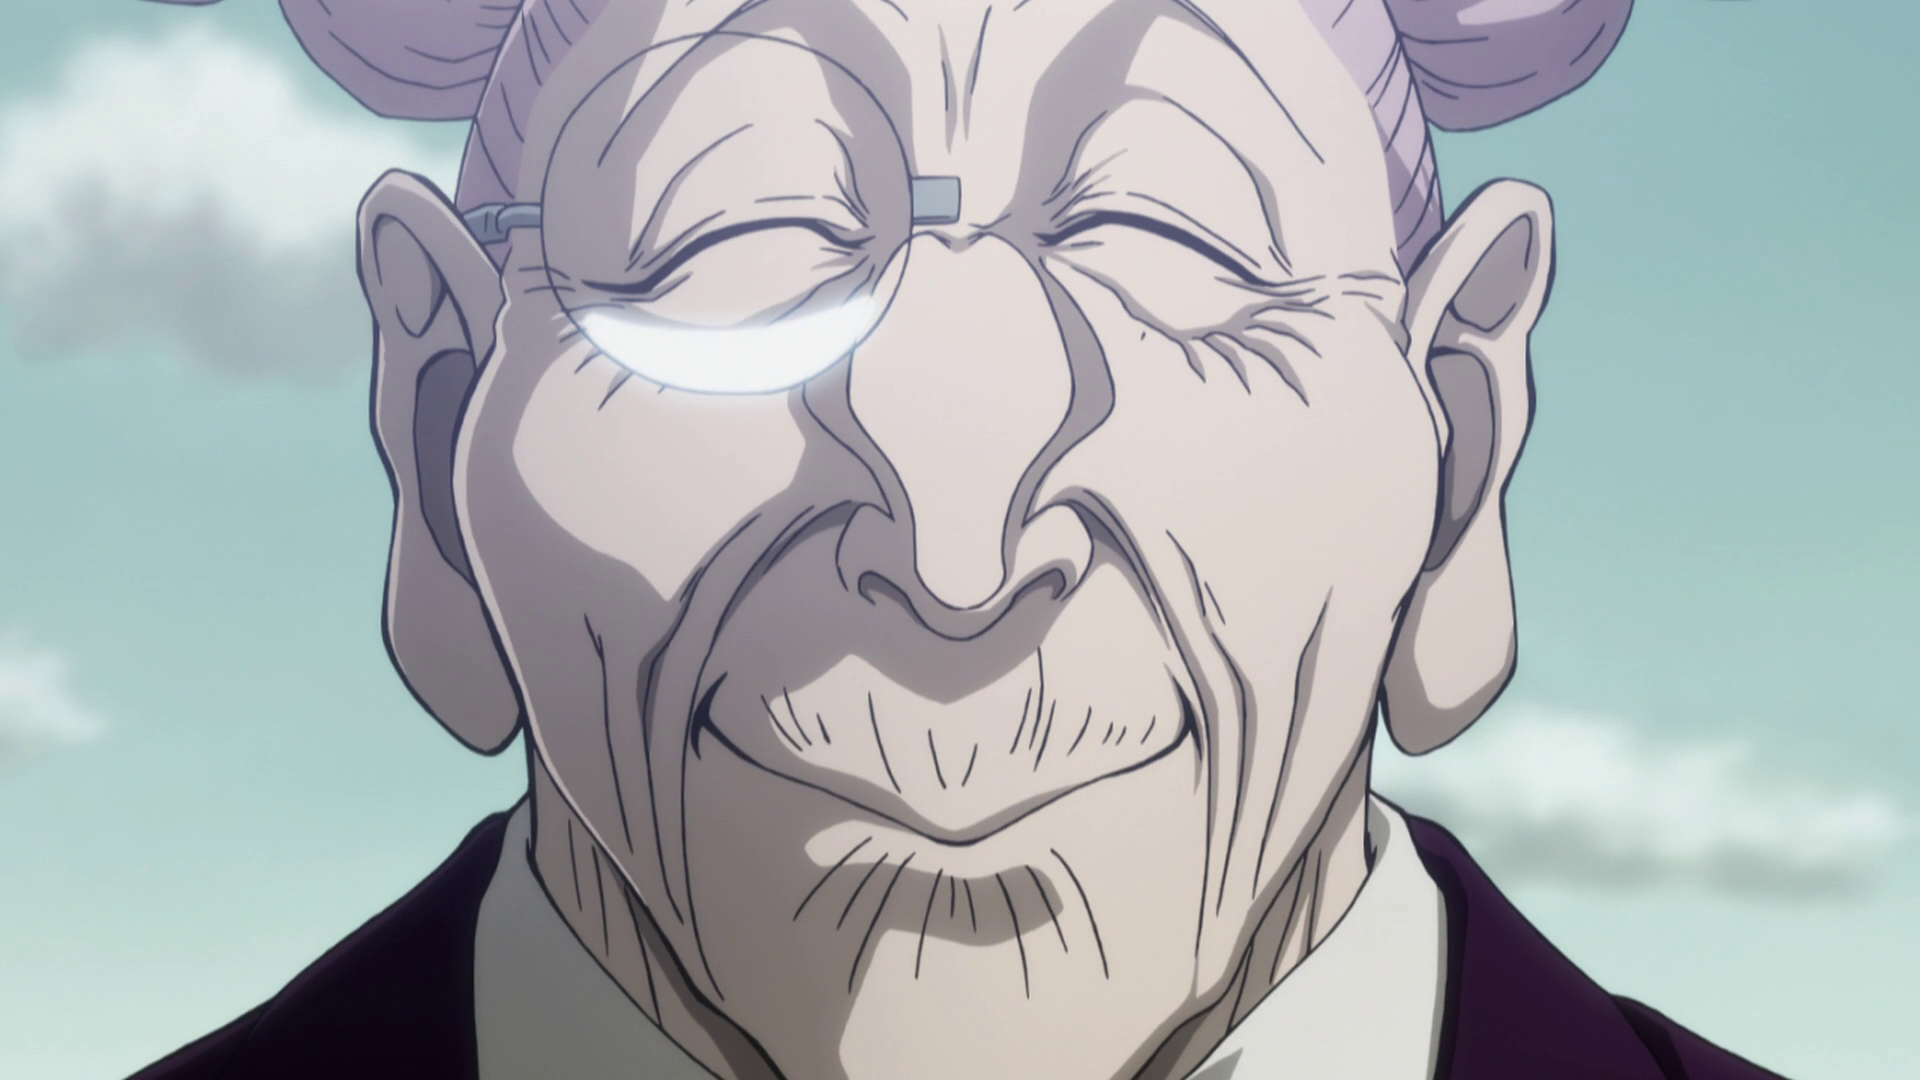 http://img3.wikia.nocookie.net/__cb20140730170959/hunterxhunter/images/c/cd/A_close_up_of_Tsubone.png